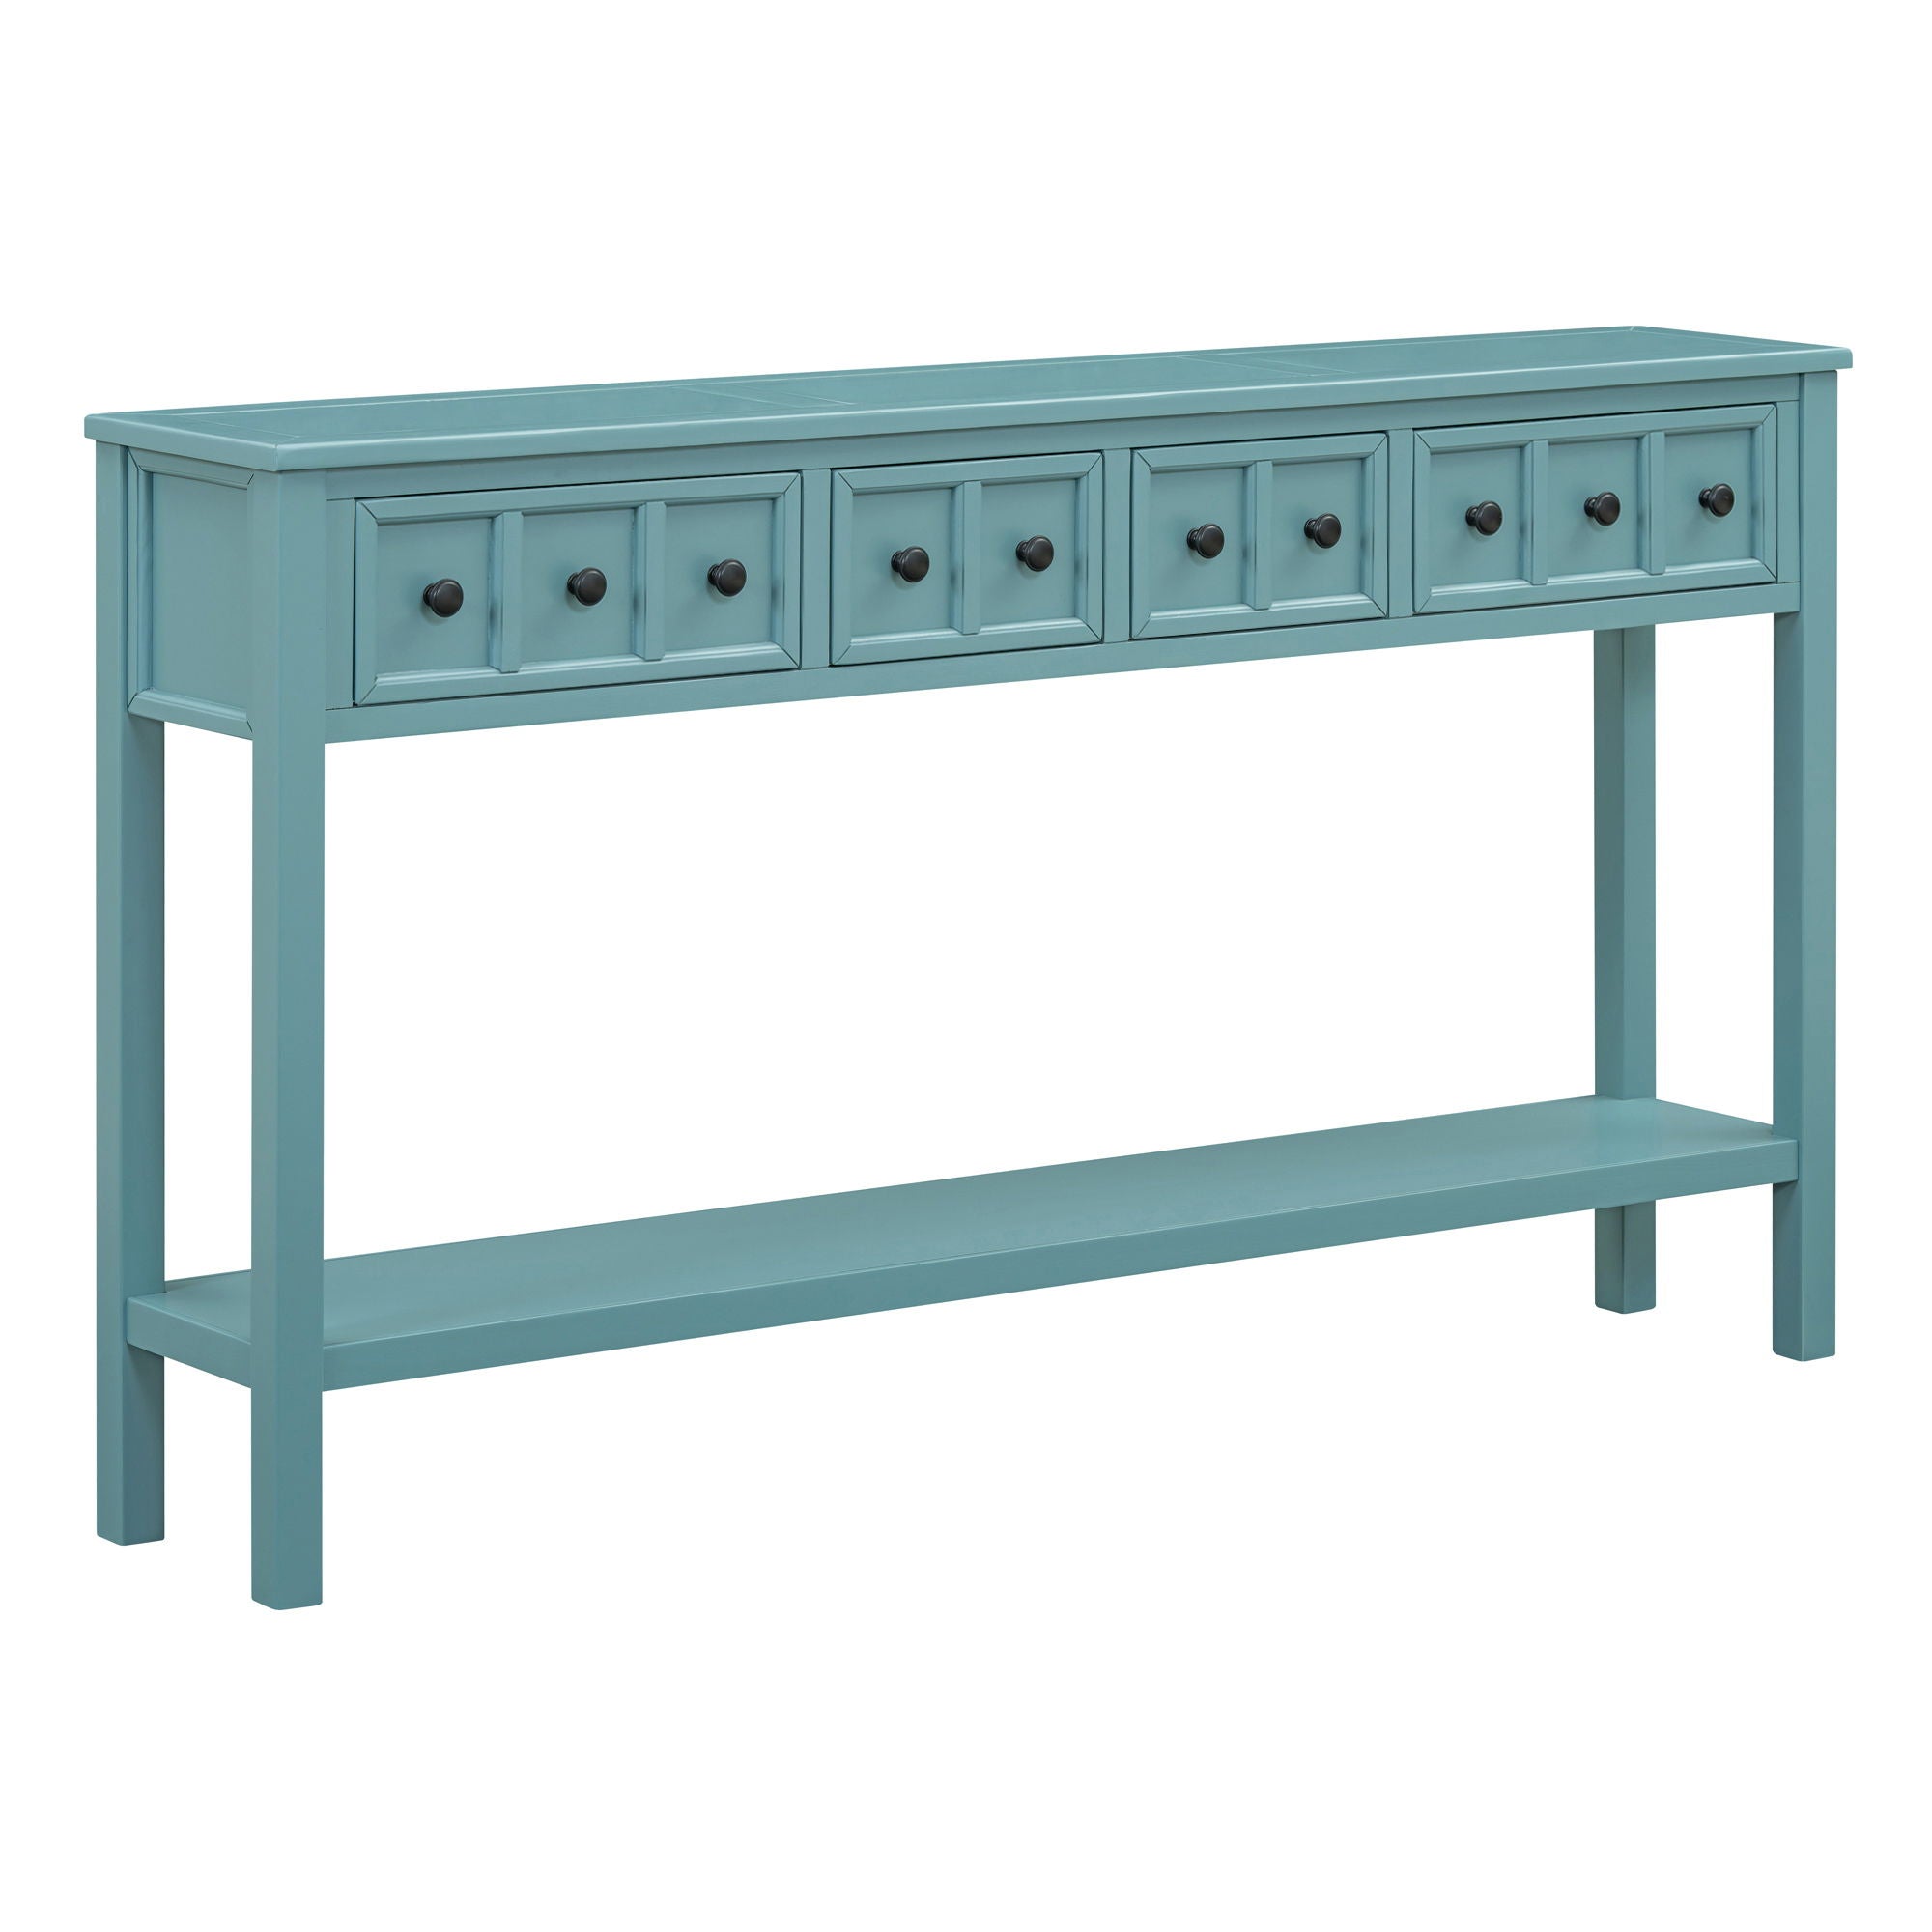 Trexm Rustic Entryway Console Table, Long Sofa Table With Two Different Size Drawers And Bottom Shelf For Storage (Turquoise Green)